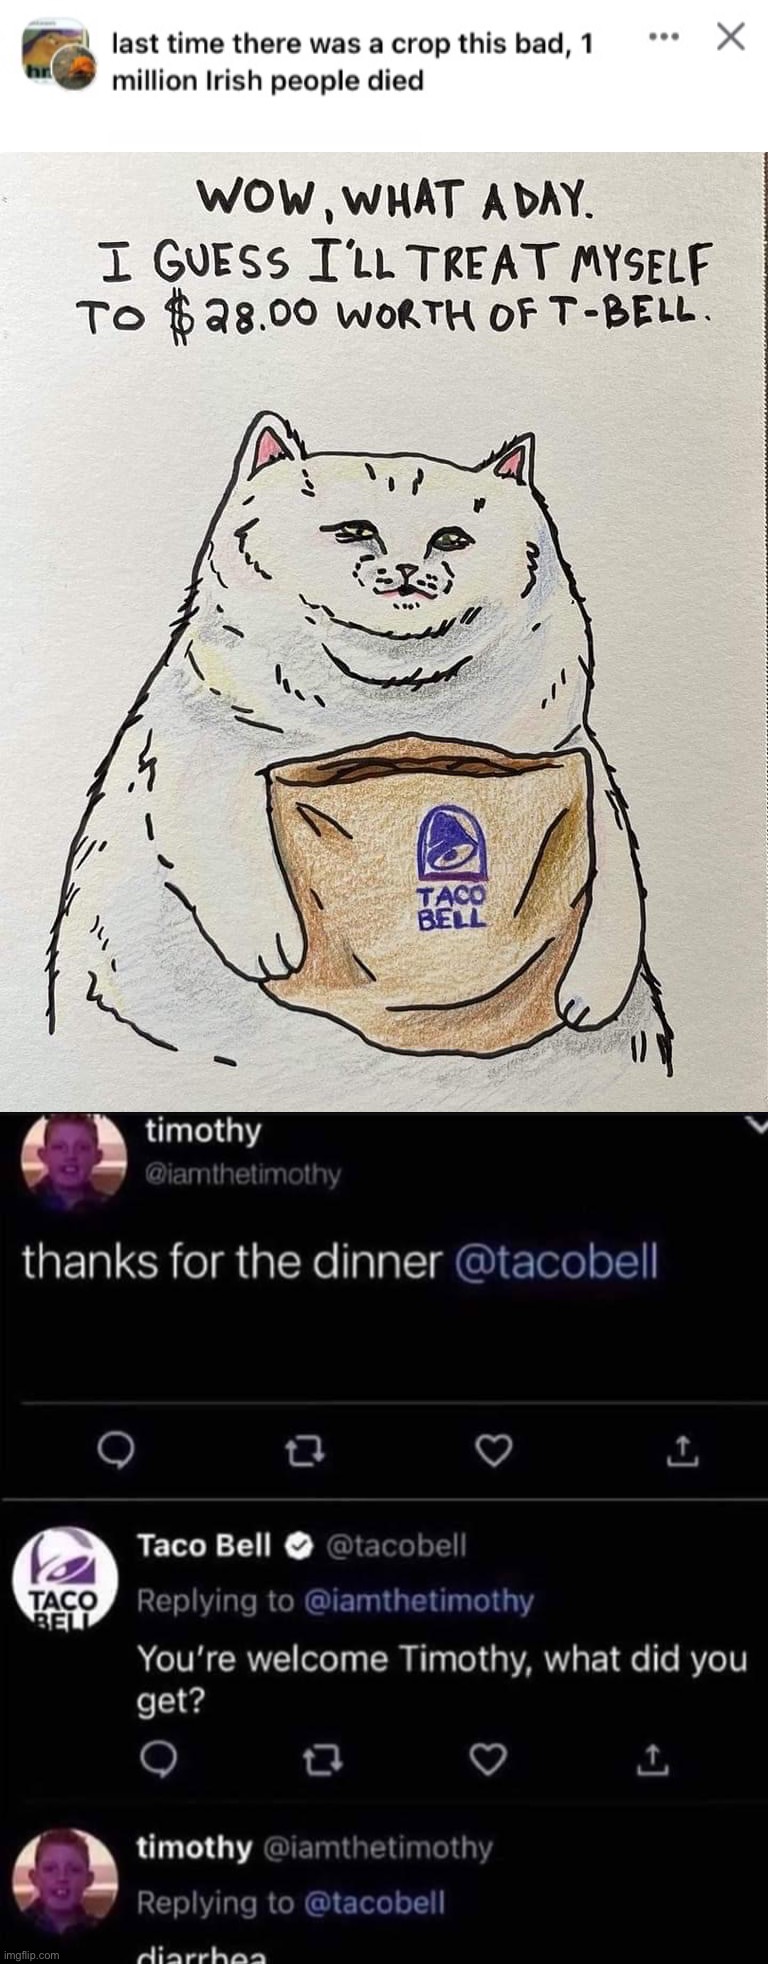 image tagged in last time there was a crop this bad 1 million irish people died,taco bell dinner | made w/ Imgflip meme maker